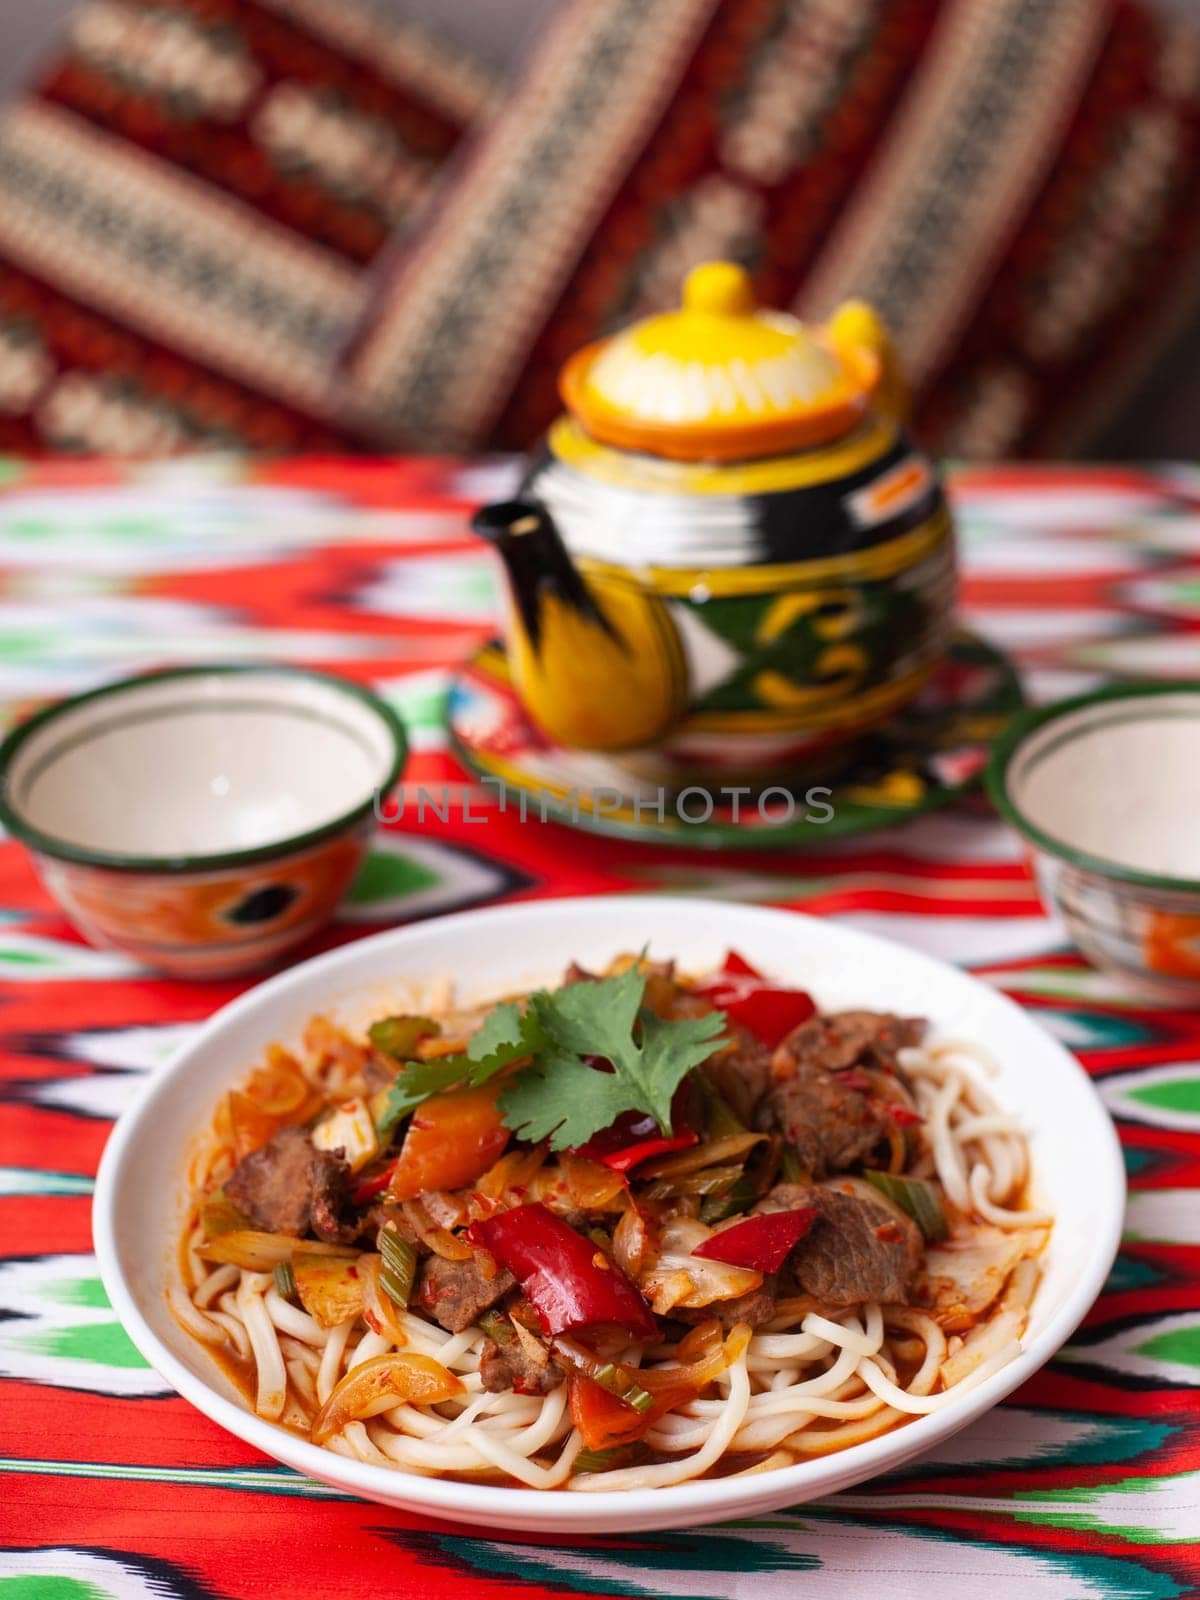 The oriental lagman dish is homemade noodles fried with meat, vegetables and herbs. Eastern cuisine. High quality photo